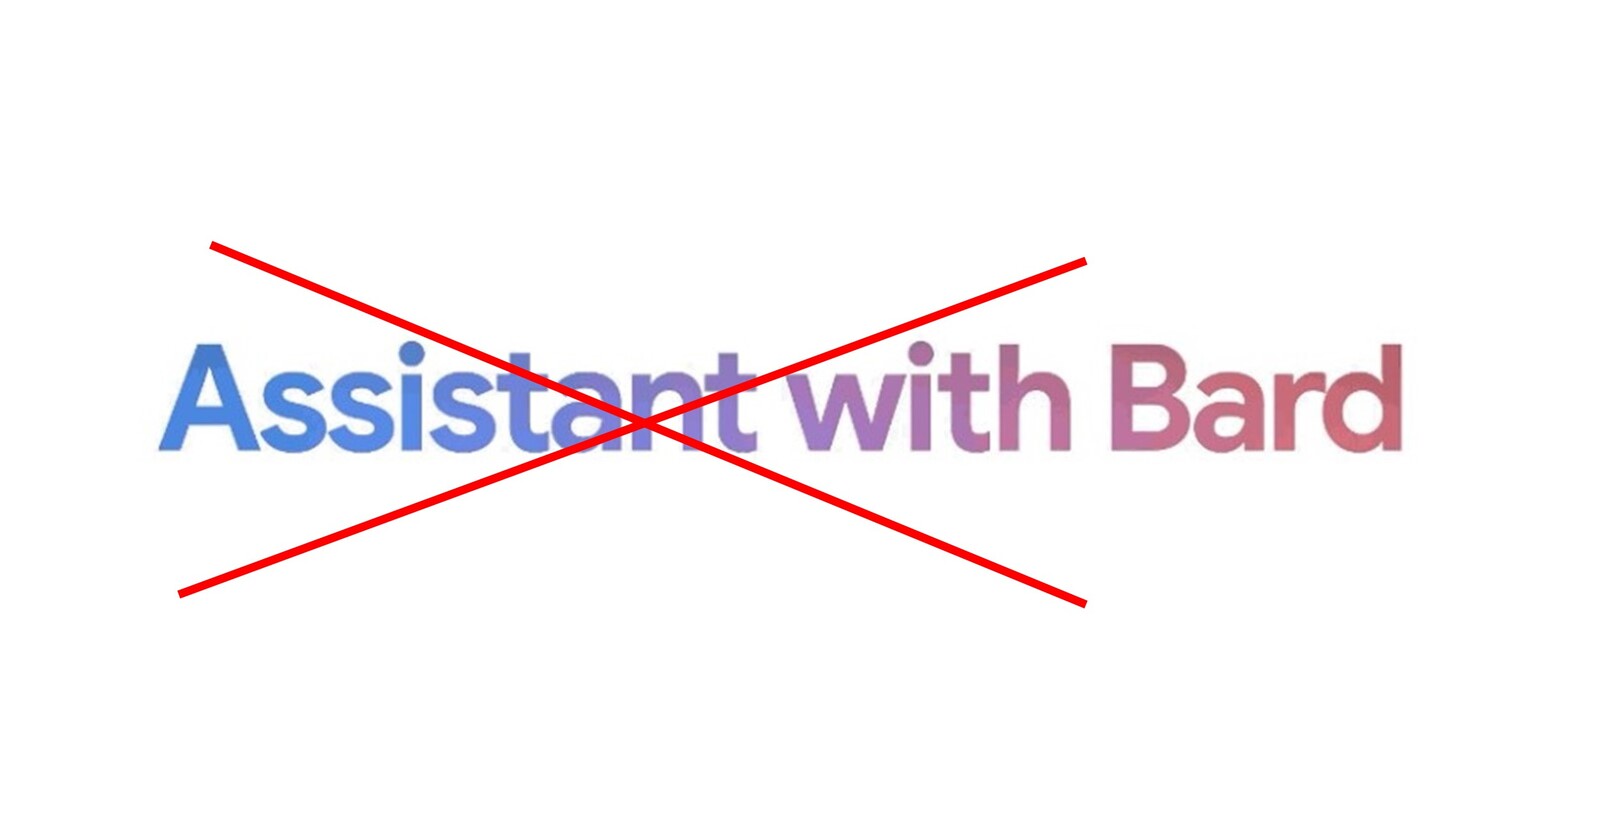 ‘Assistant with Bard’ might get rebranded before it arrives on your Google Pixel phone